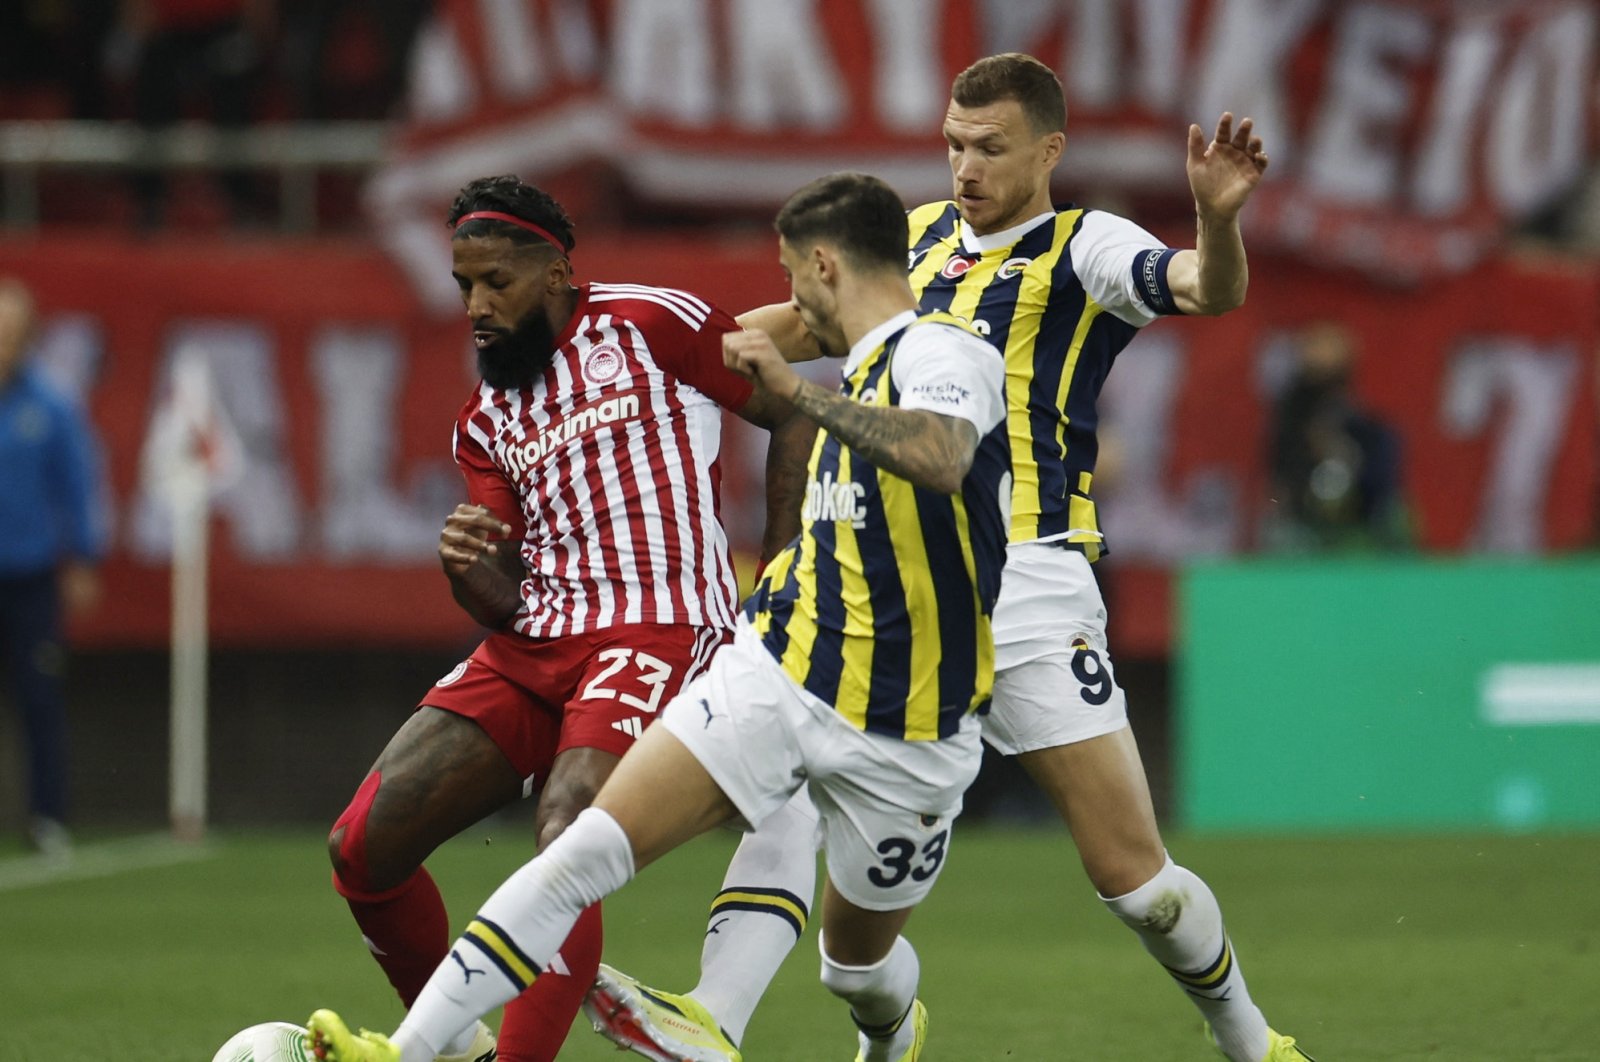 Fenerbahçe eye Conference League semis as they host Olympiacos